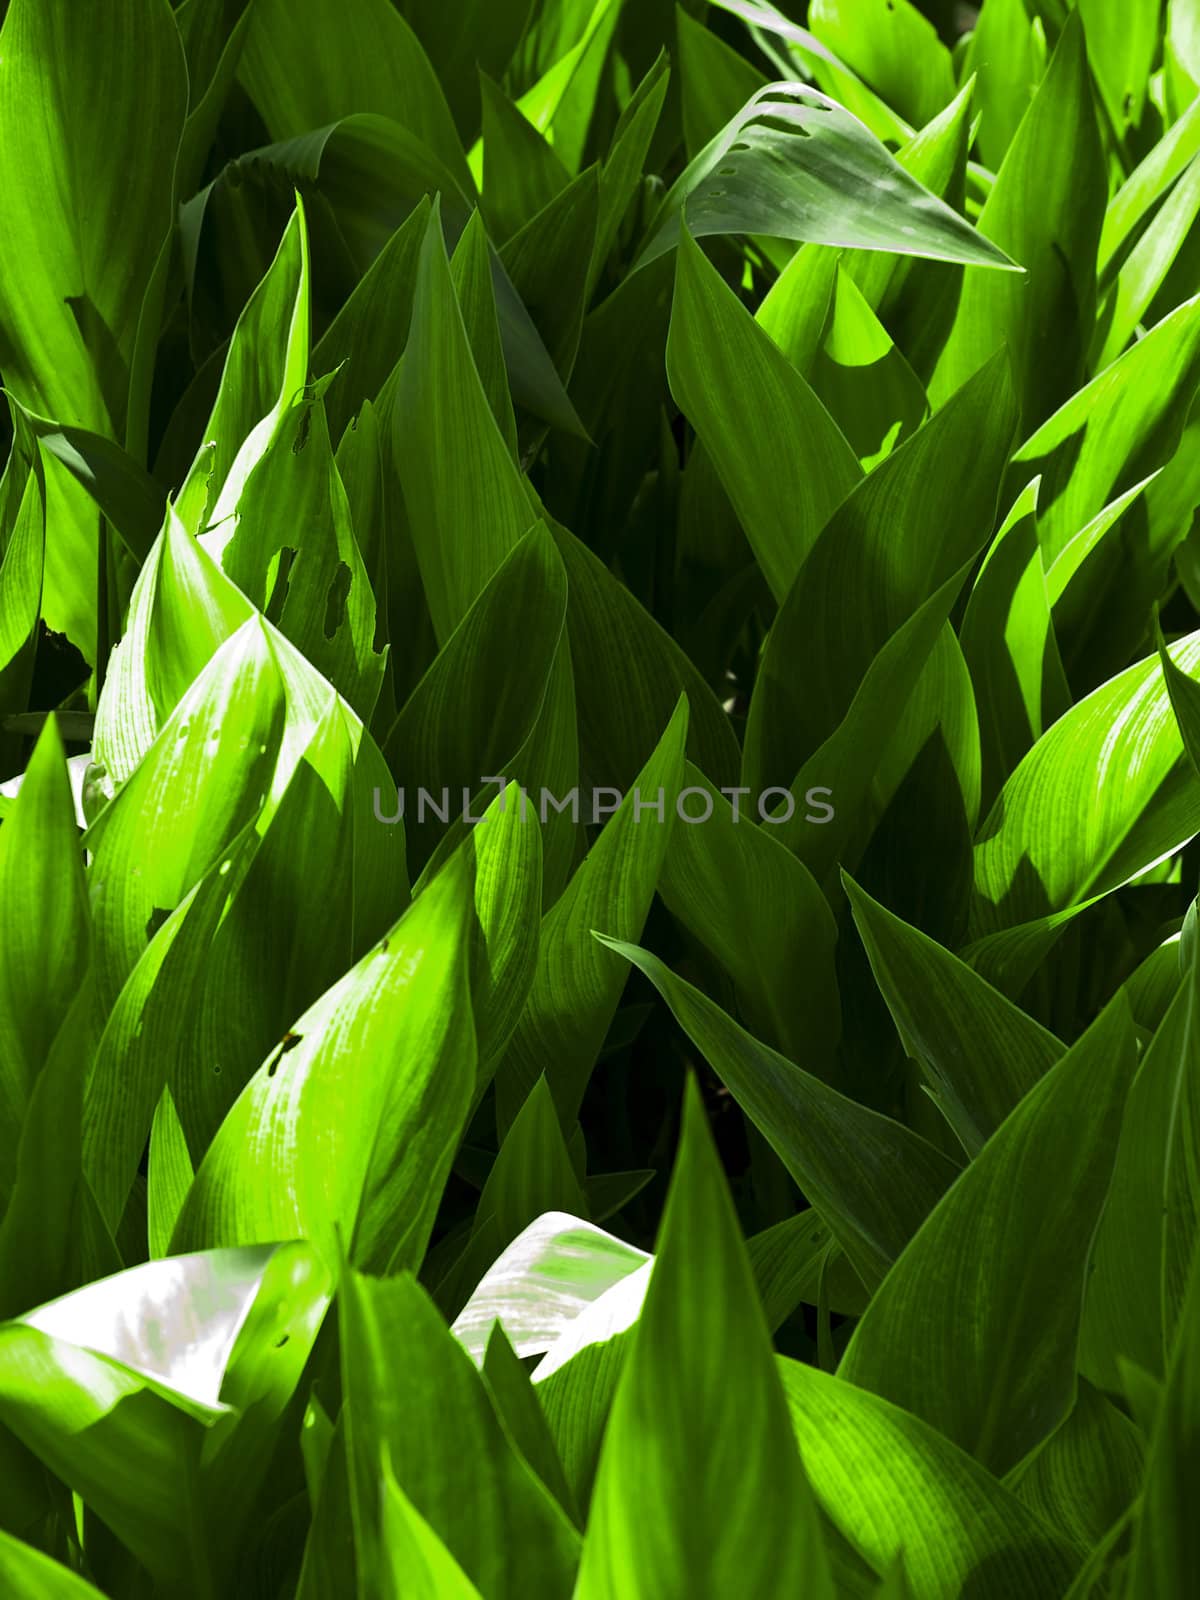 Abstract image of vivid and saturated green leaves